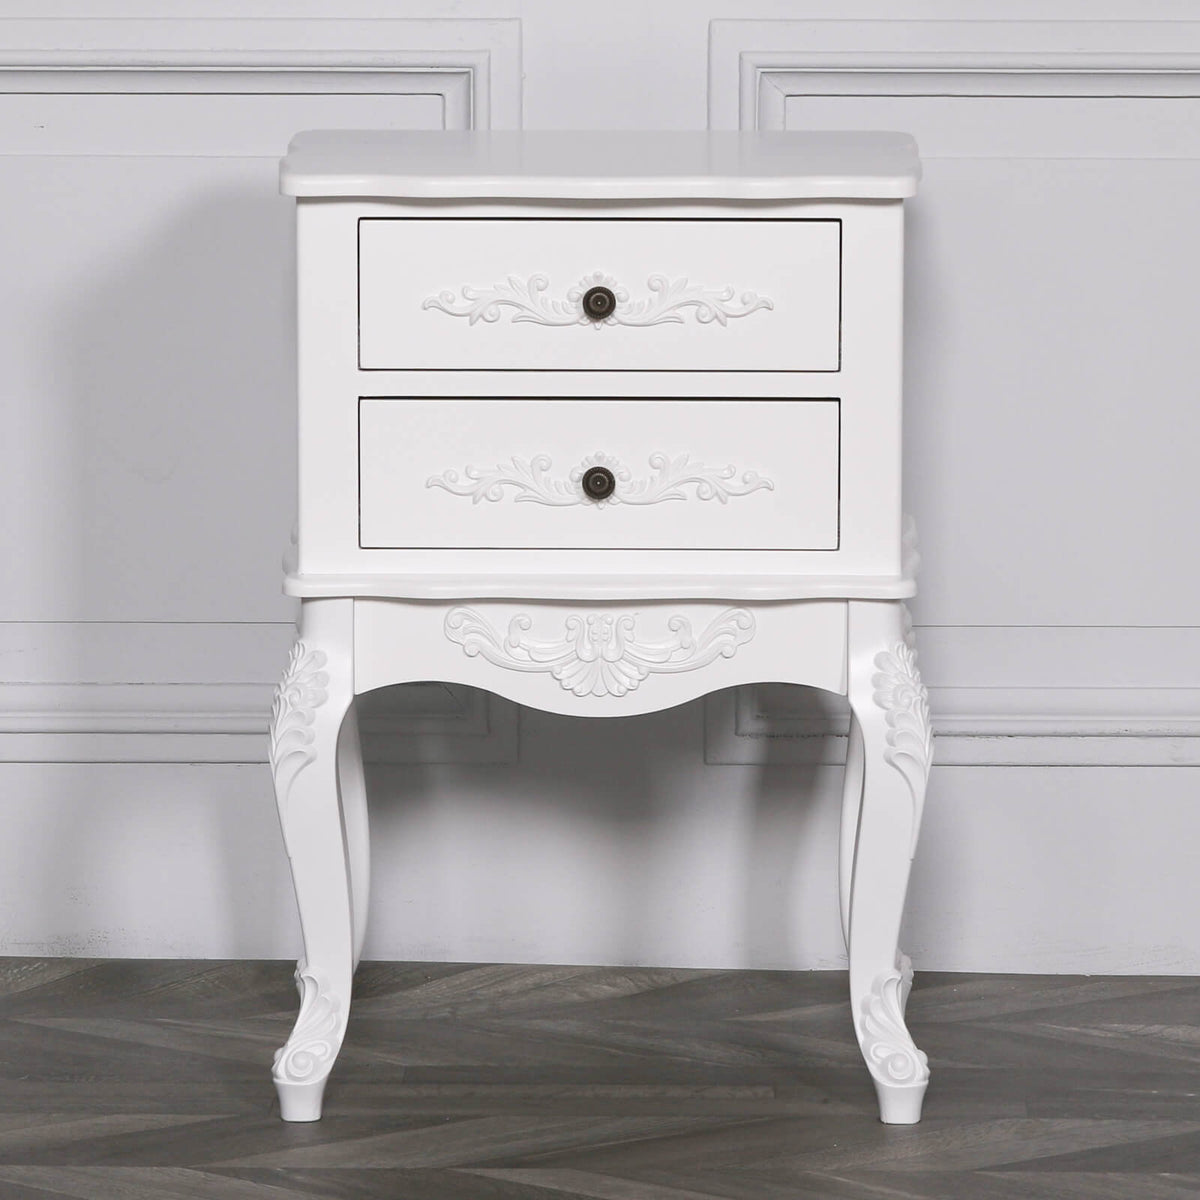 French bedside tables for sale french style bedside table uk vintage french bedside table pair white french bedside table for sale uk buy french bedside tables uk french shabby chic bedside tables white uk online with drawers pair